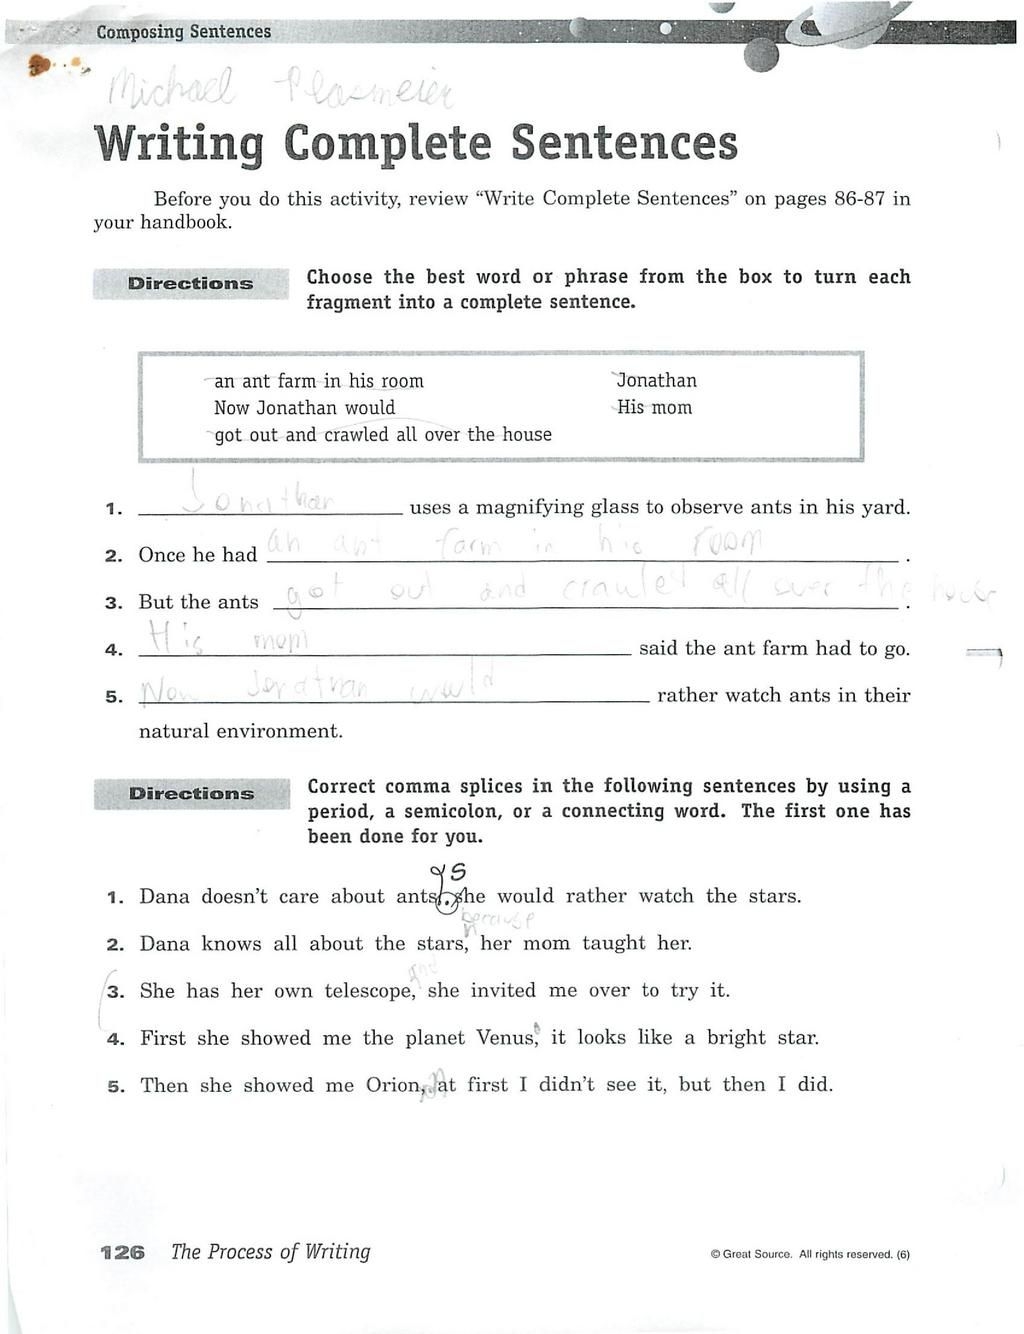 Free Grammar Worksheets 6th Grade Pinterest Saferbrowser Yahoo Image Search Results Grammar Worksheets 6th Grade Worksheets 6th Grade Writing